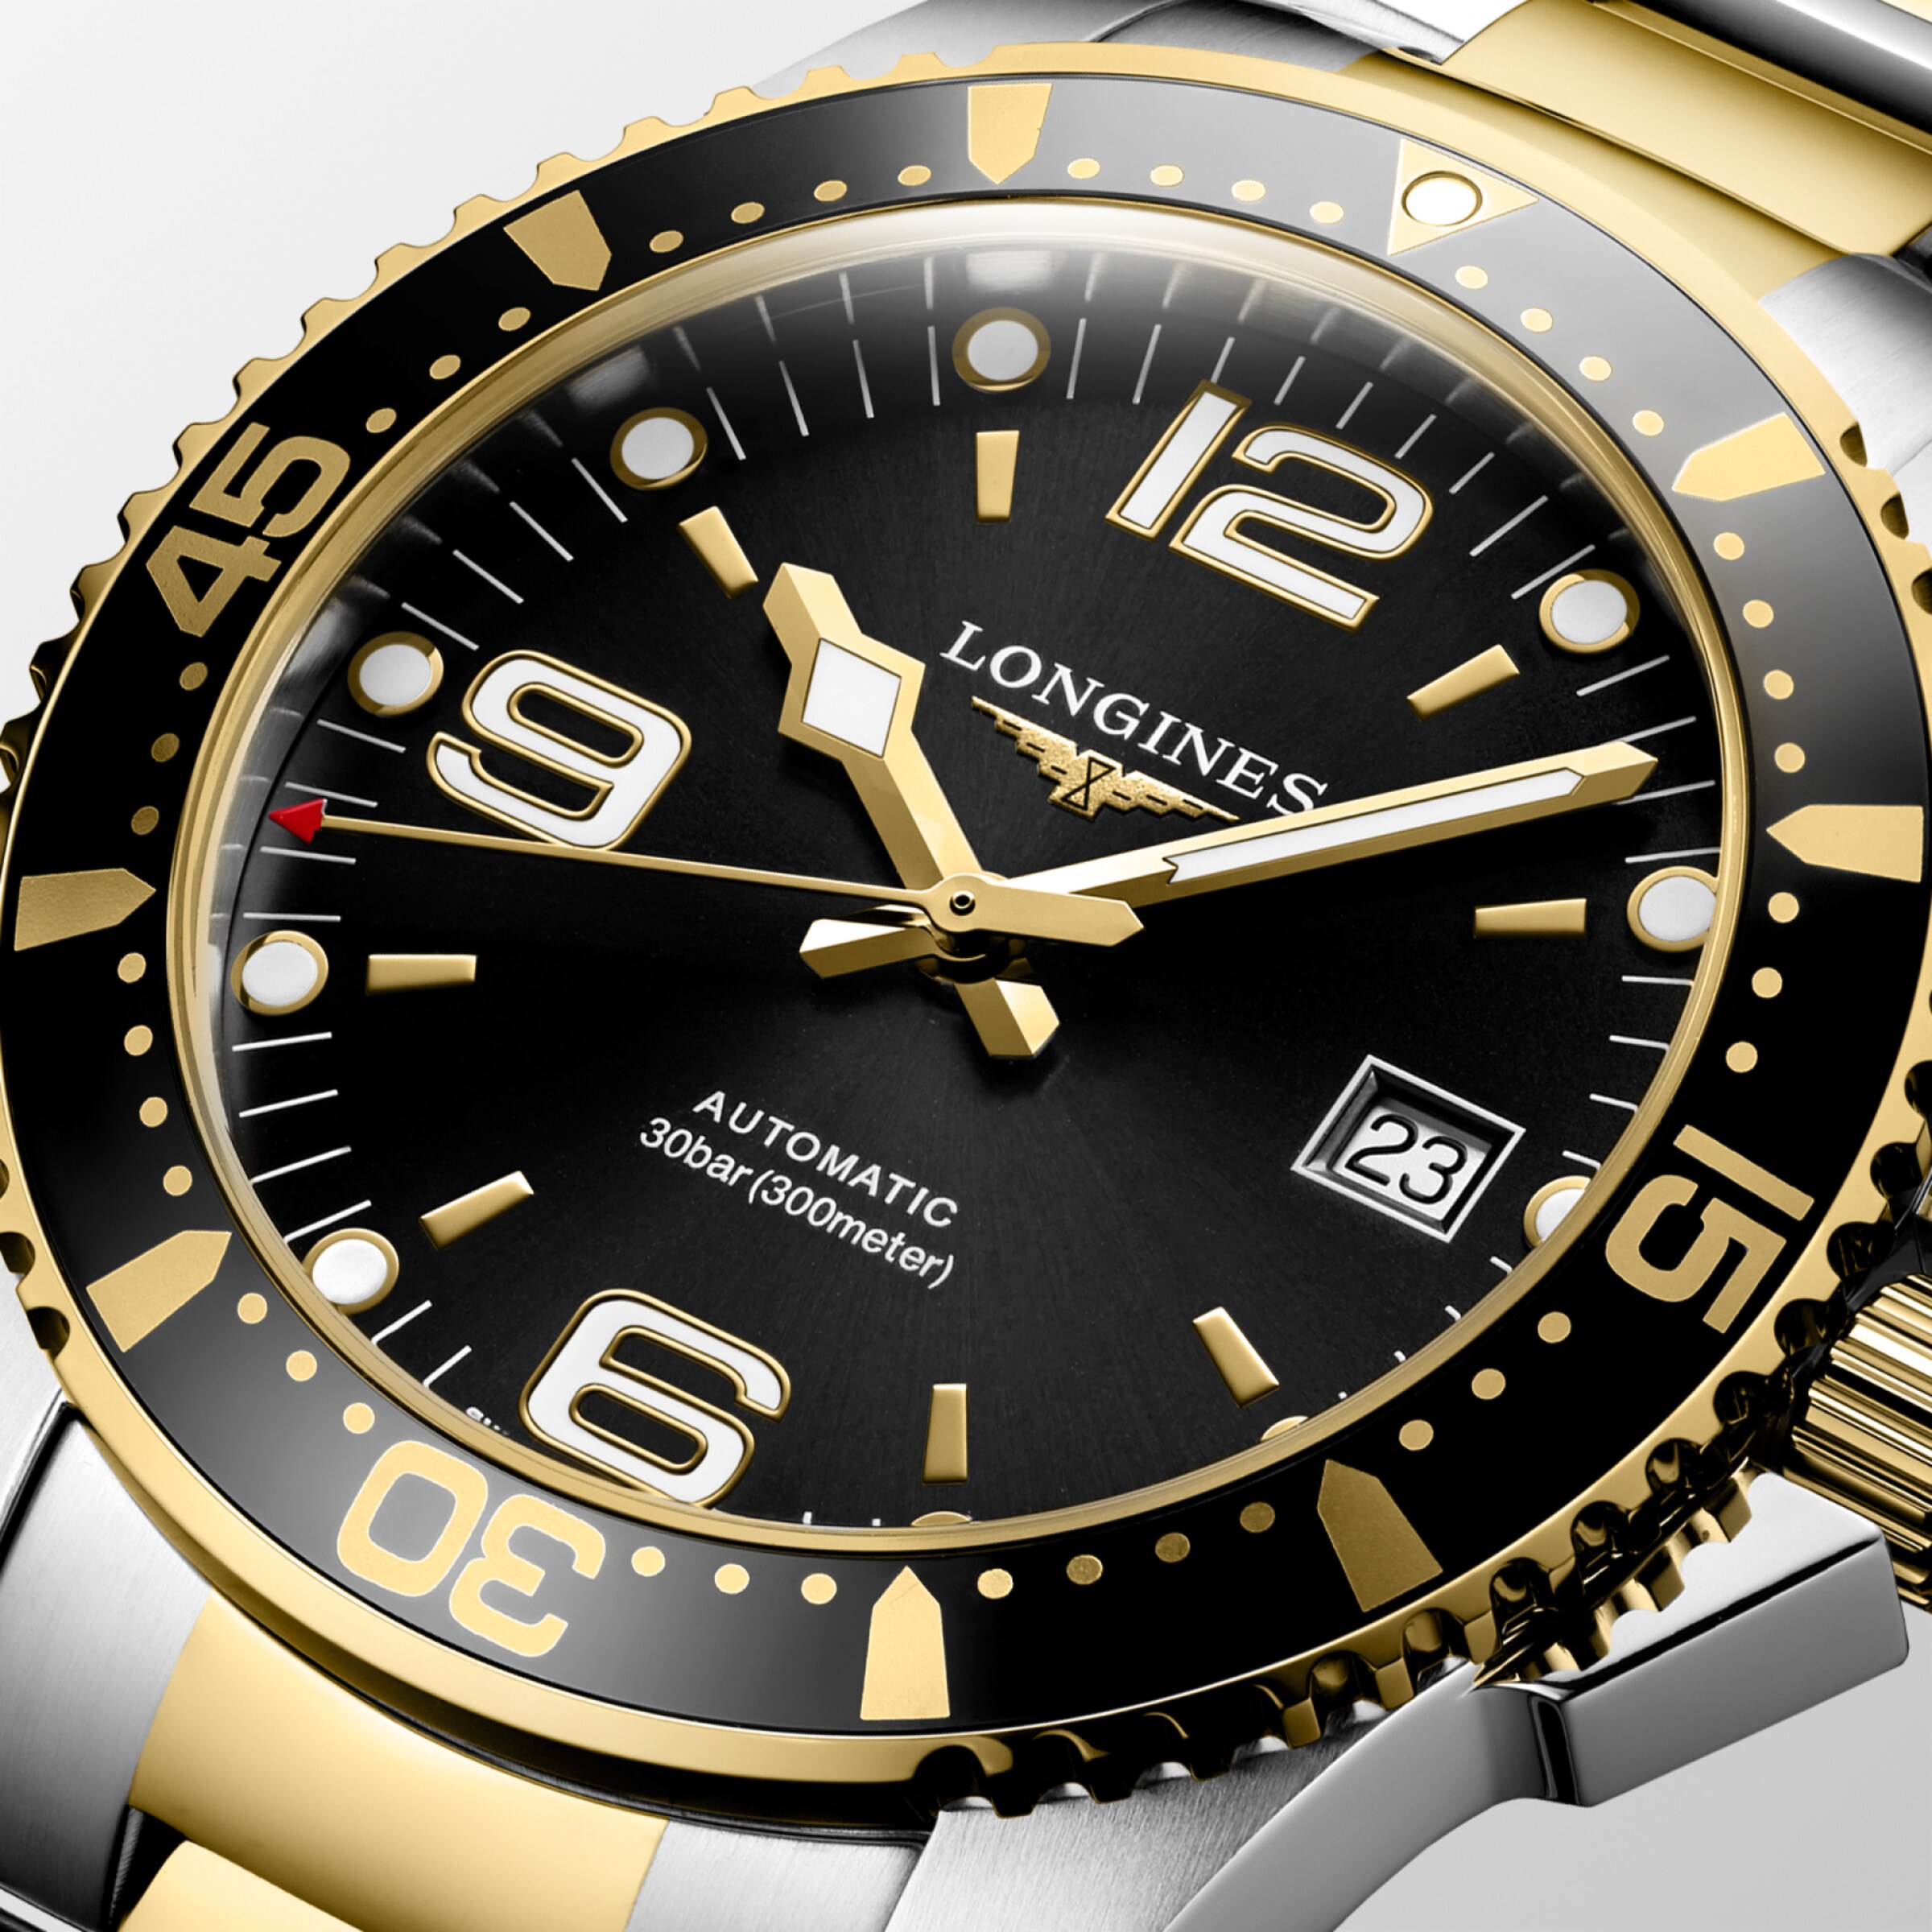 Longines HYDROCONQUEST Automatic Stainless steel and yellow PVD coating Watch - L3.742.3.56.7